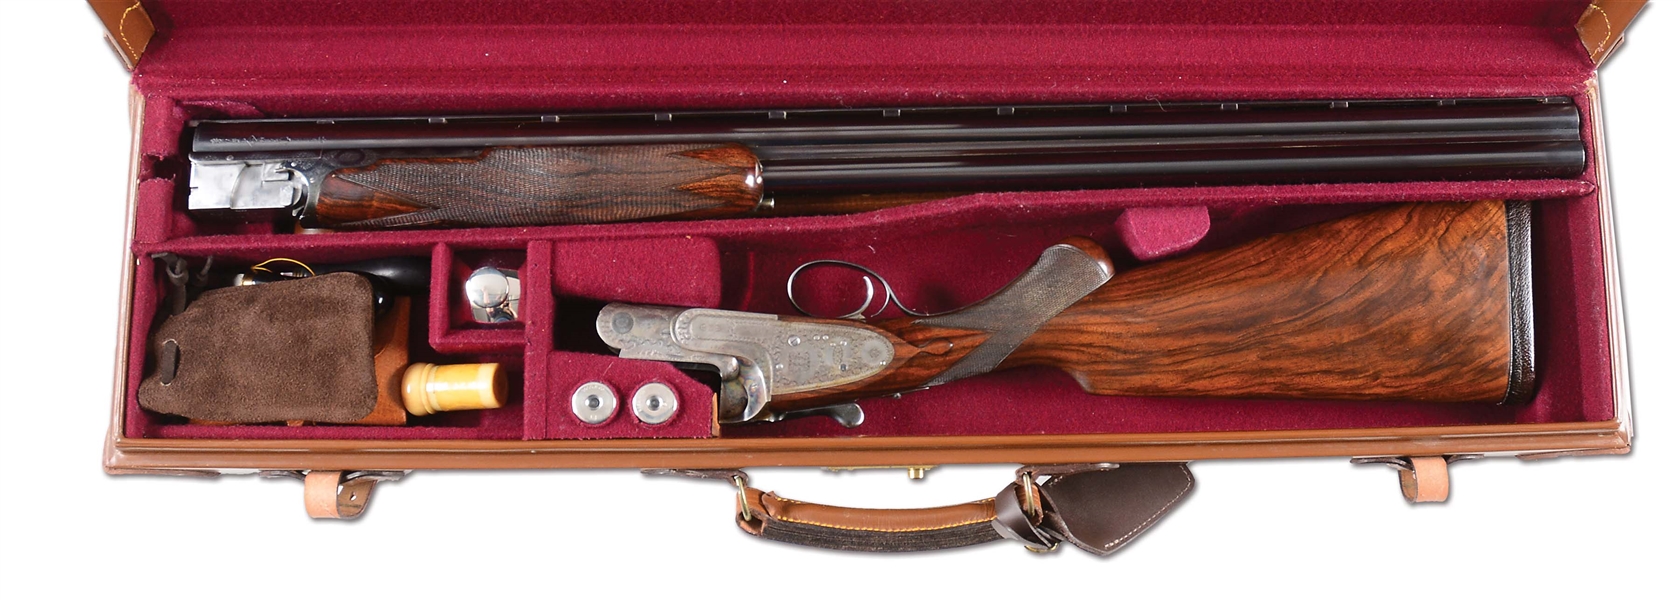 (C) FINE BOSS & CO. SIDELOCK EJECTOR SINGLE TRIGGER OVER-UNDER PIGEON SHOTGUN WITH CASE.